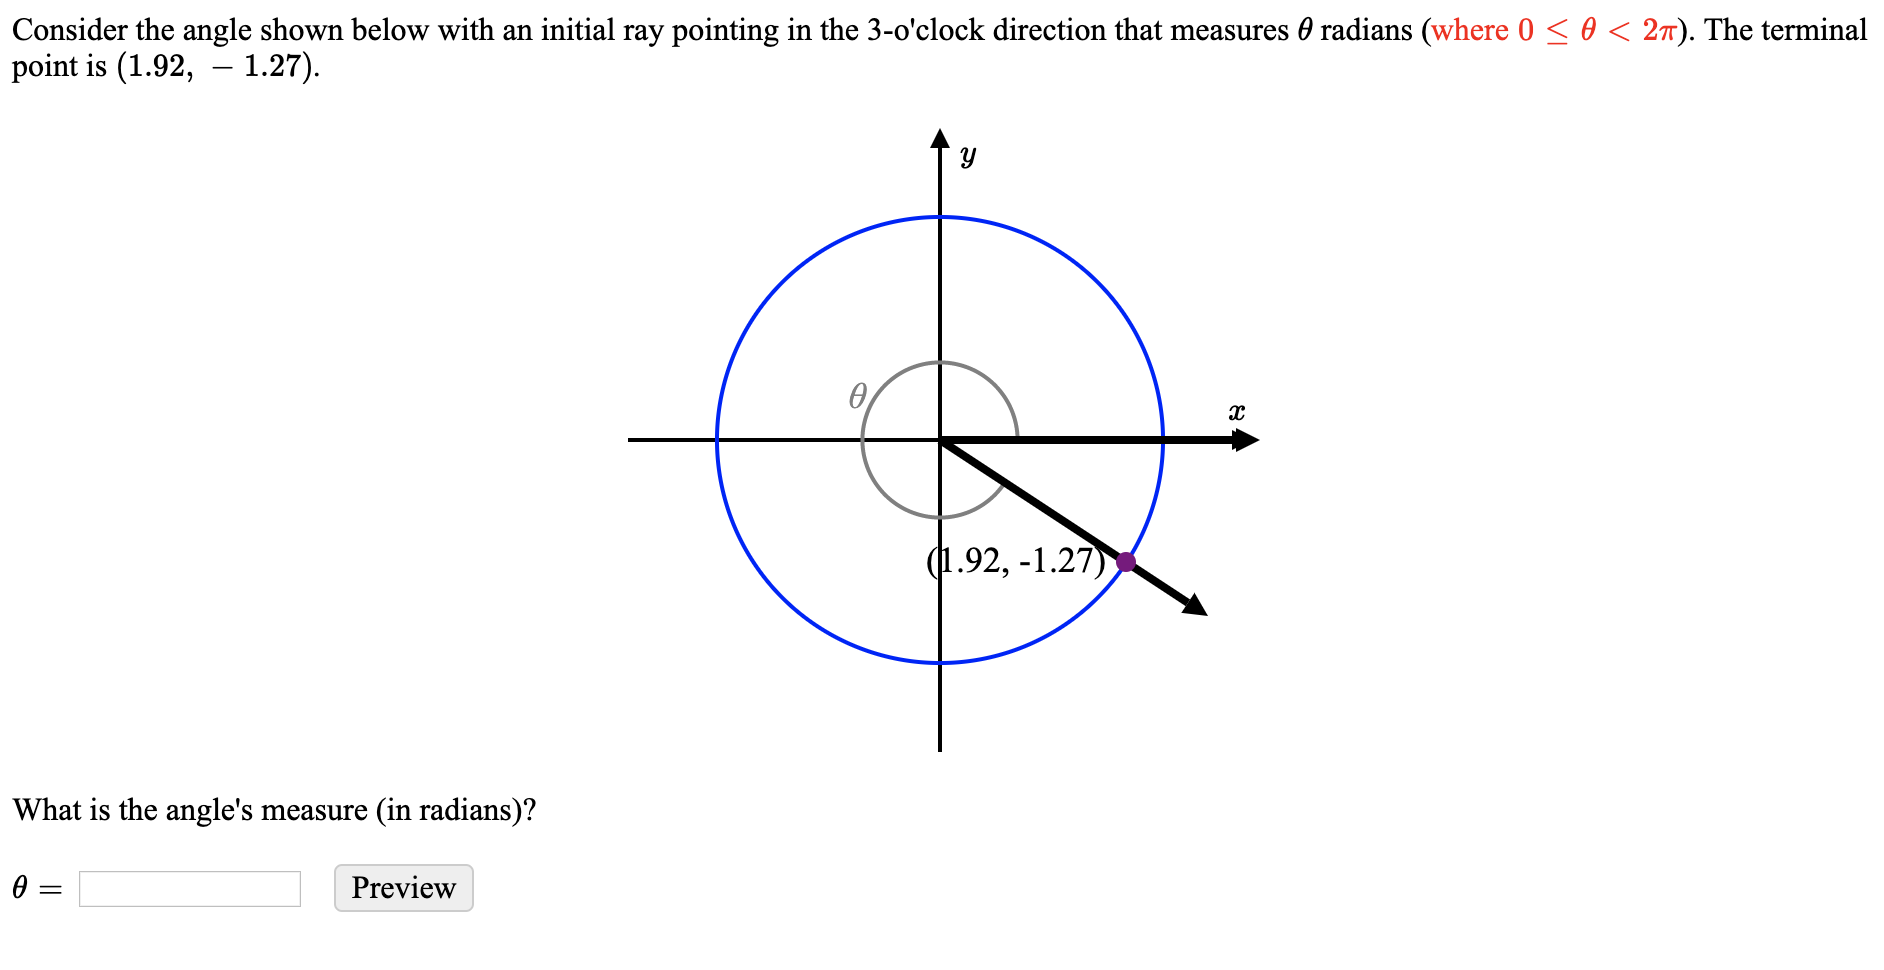 Consider the angle shown below with an initial ray pointing in the 3-o'clock direction that measures 0 radians (where 0 < 0 < 27). The terminal
point is (1.92, – 1.27).
(1.92, -1.27)
What is the angle's measure (in radians)?
Preview
